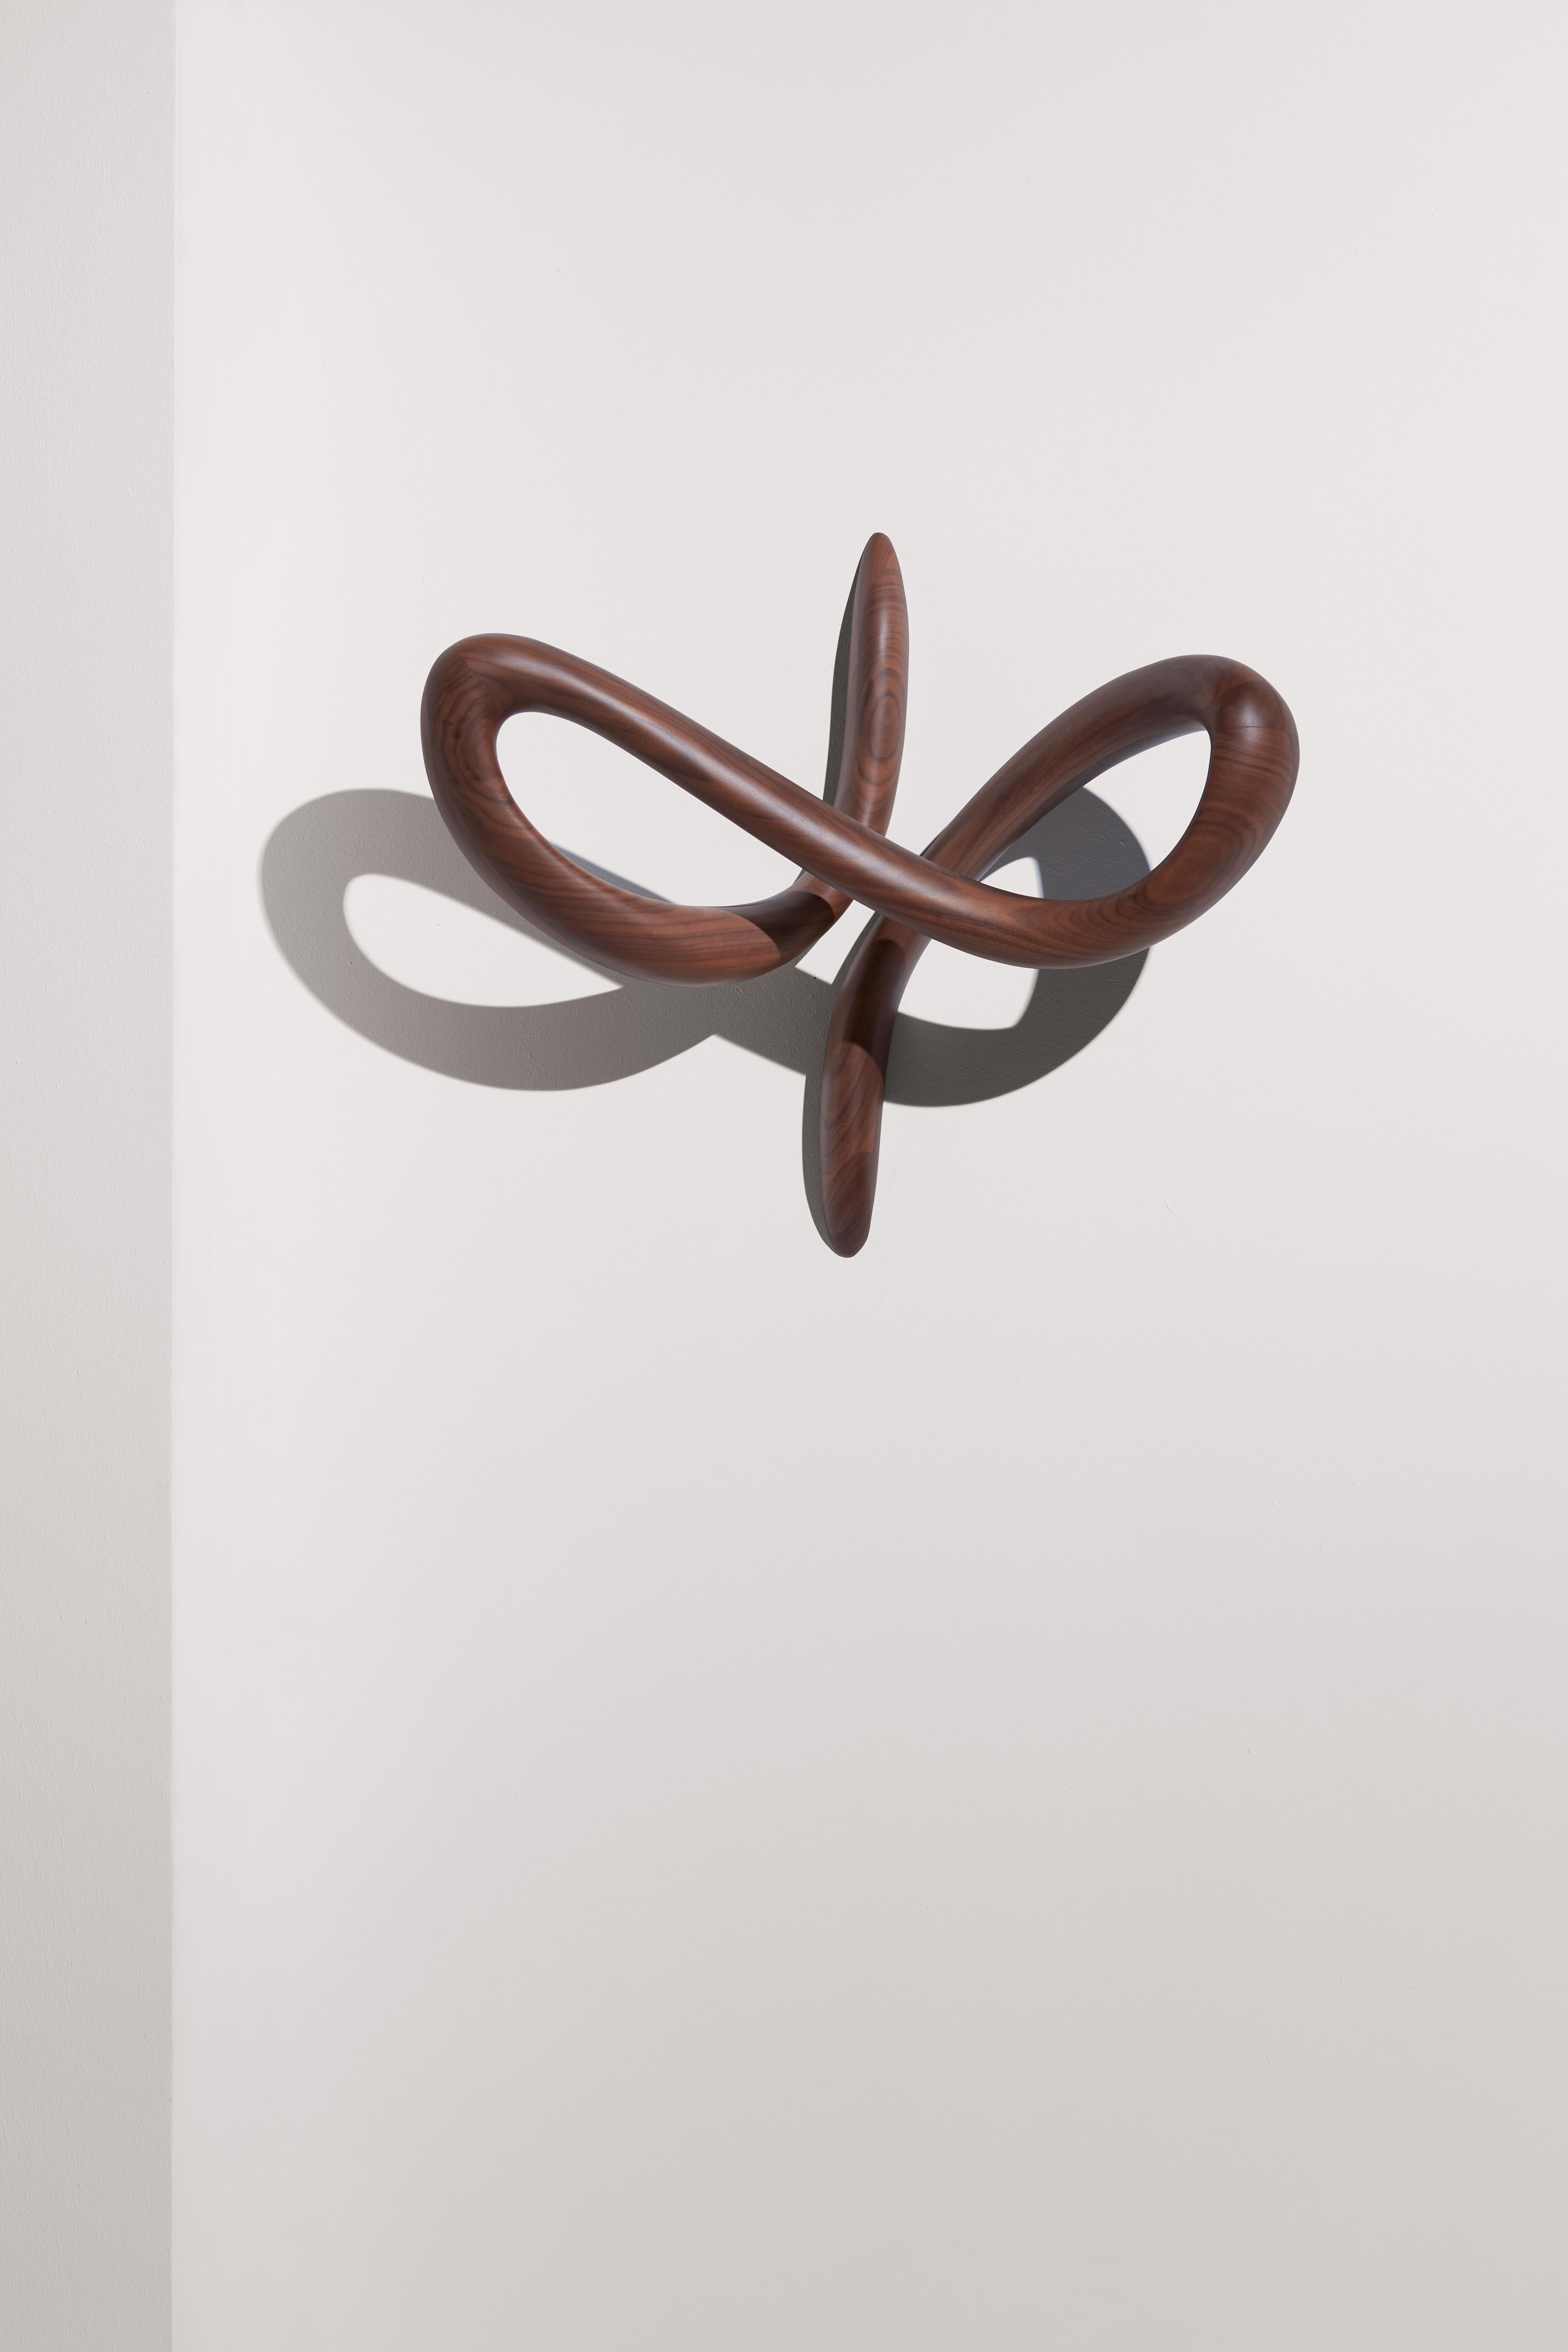 Timeless sculpture, its aesthetic function expresses a unique lifestyle.

Available in 
Walnut

Small and Large Size